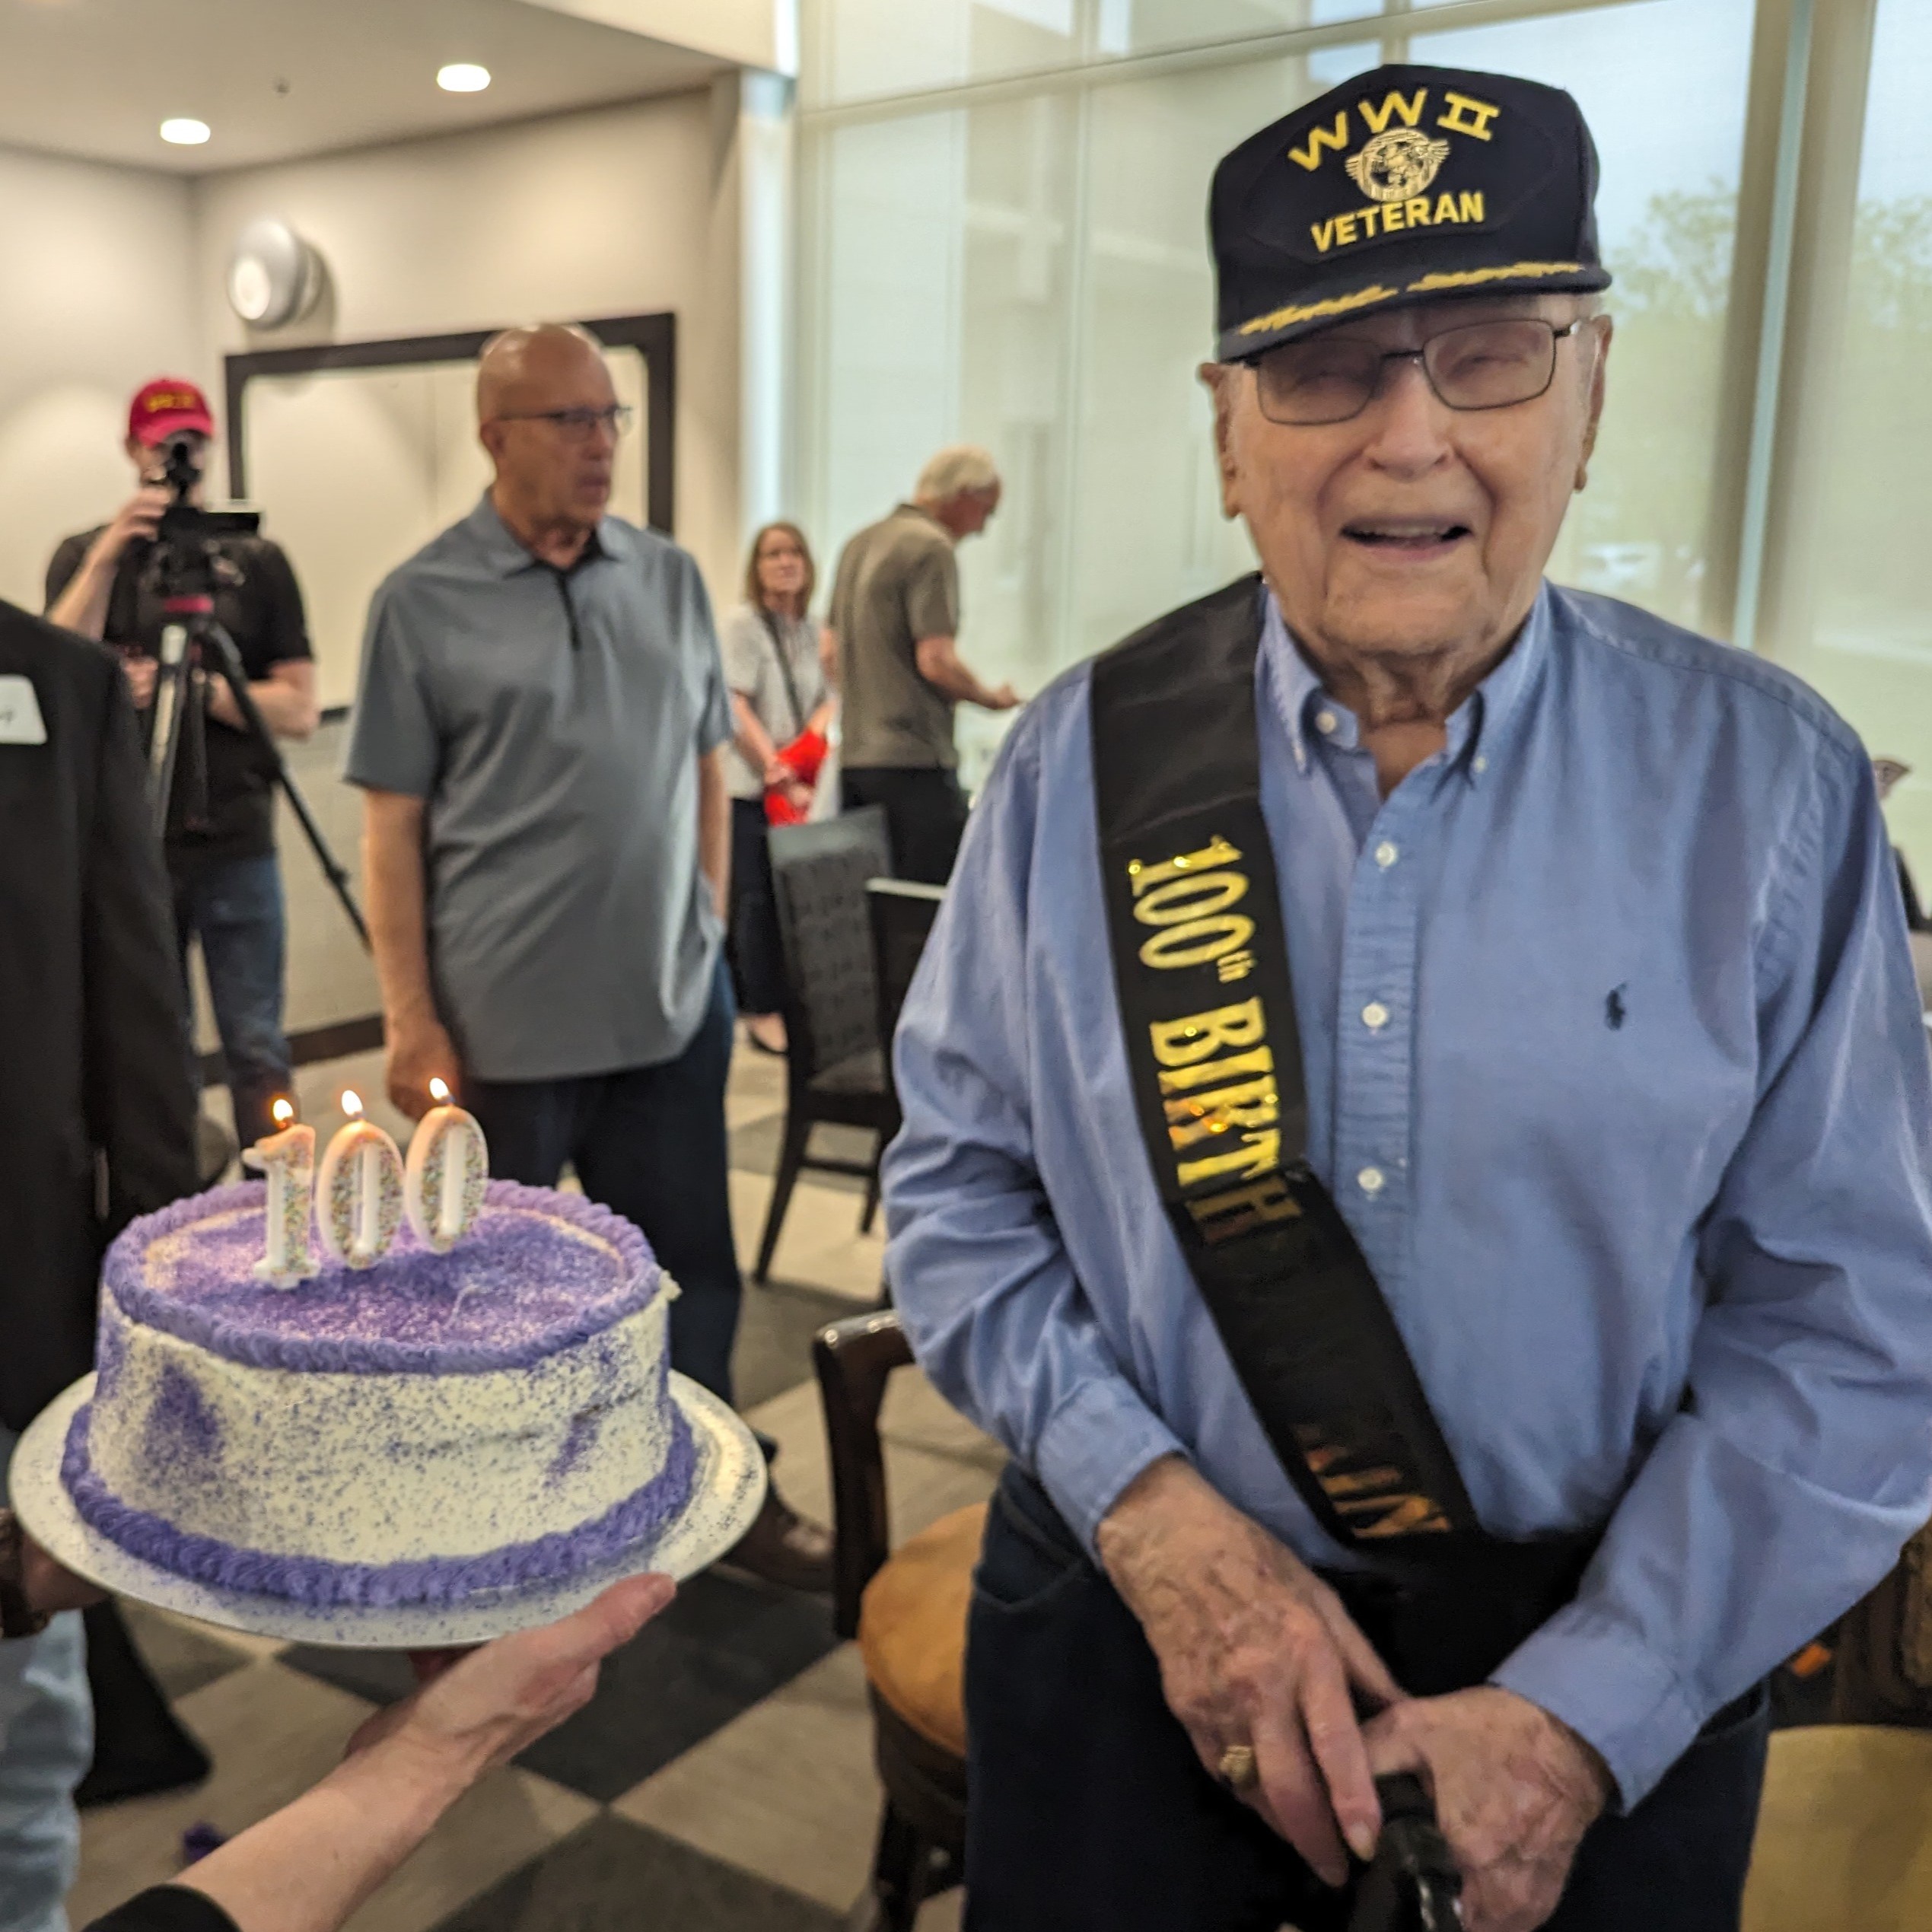 K-State graduate, WWII veteran and former K-State instructor celebrates 100th birthday